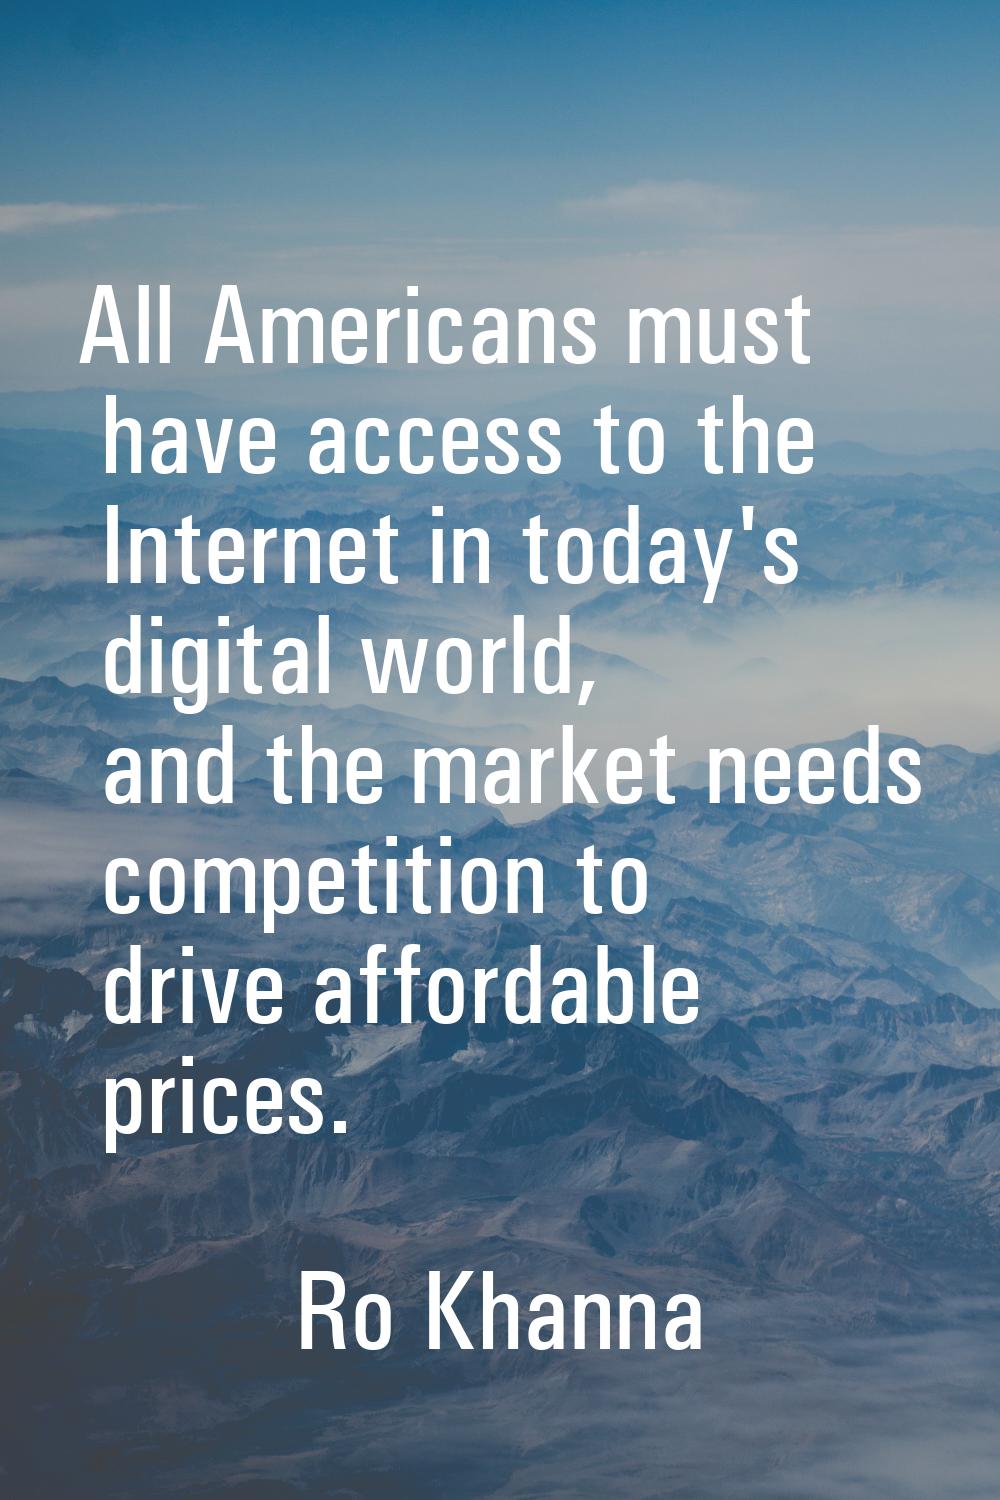 All Americans must have access to the Internet in today's digital world, and the market needs compe